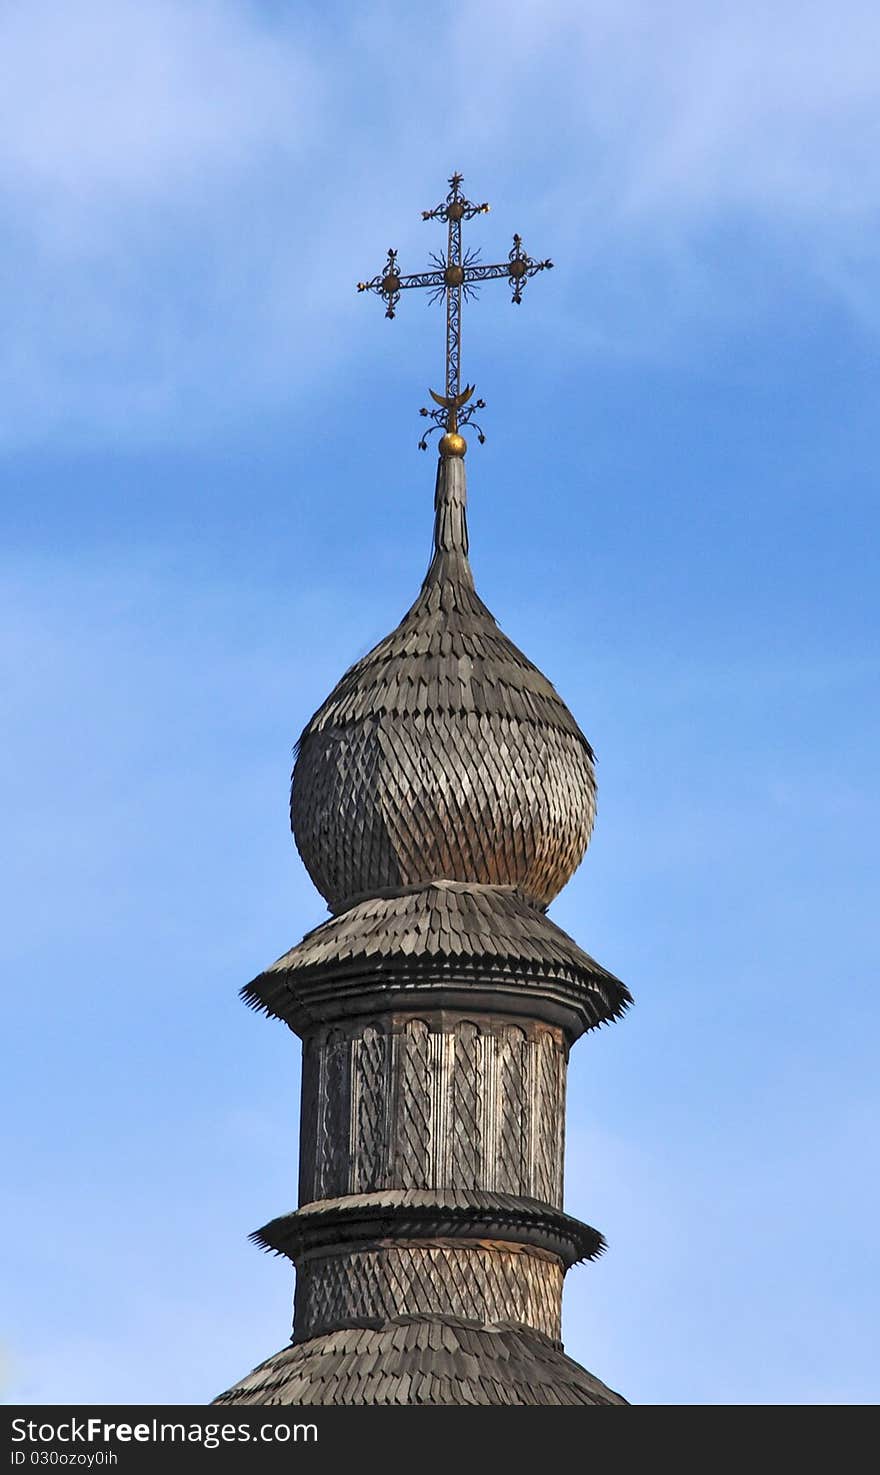 Dome of wooden church against the blue sky